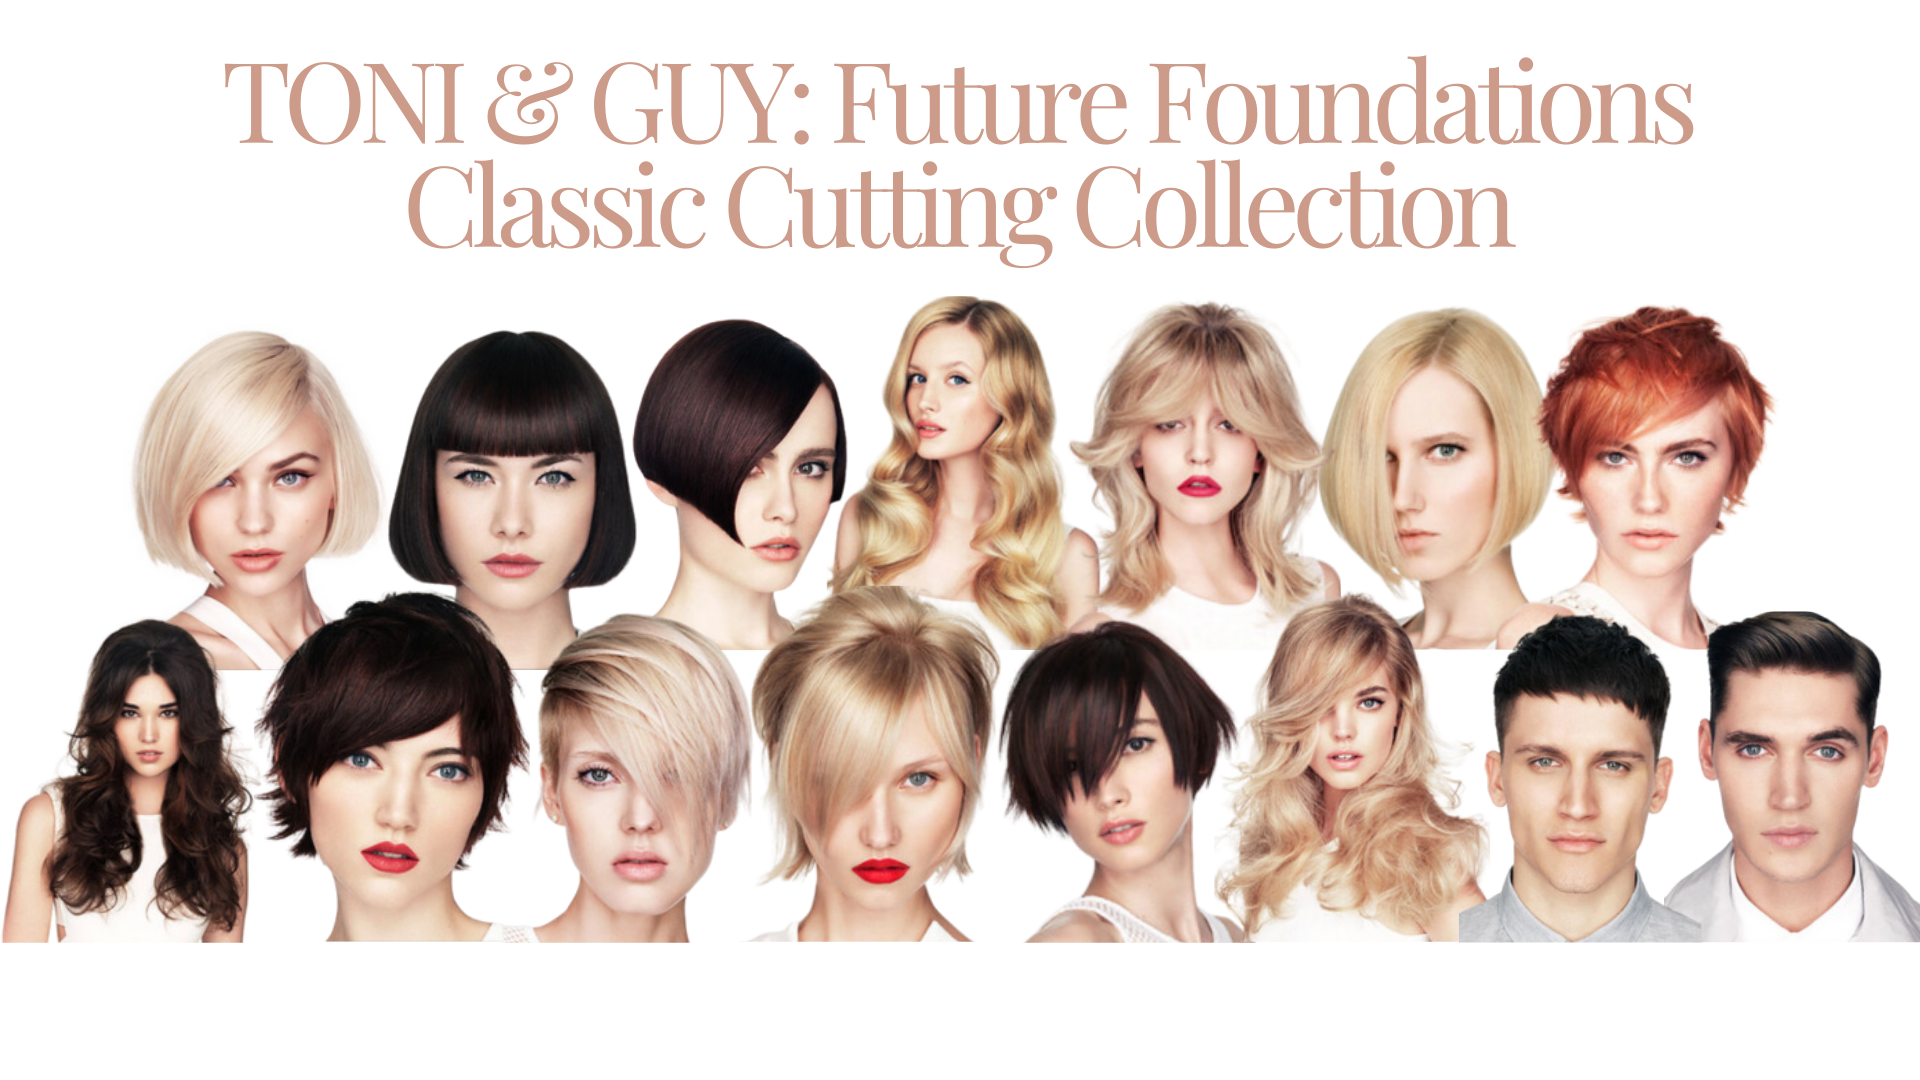 TONI&GUY: Future Foundations Classic Cutting Collection